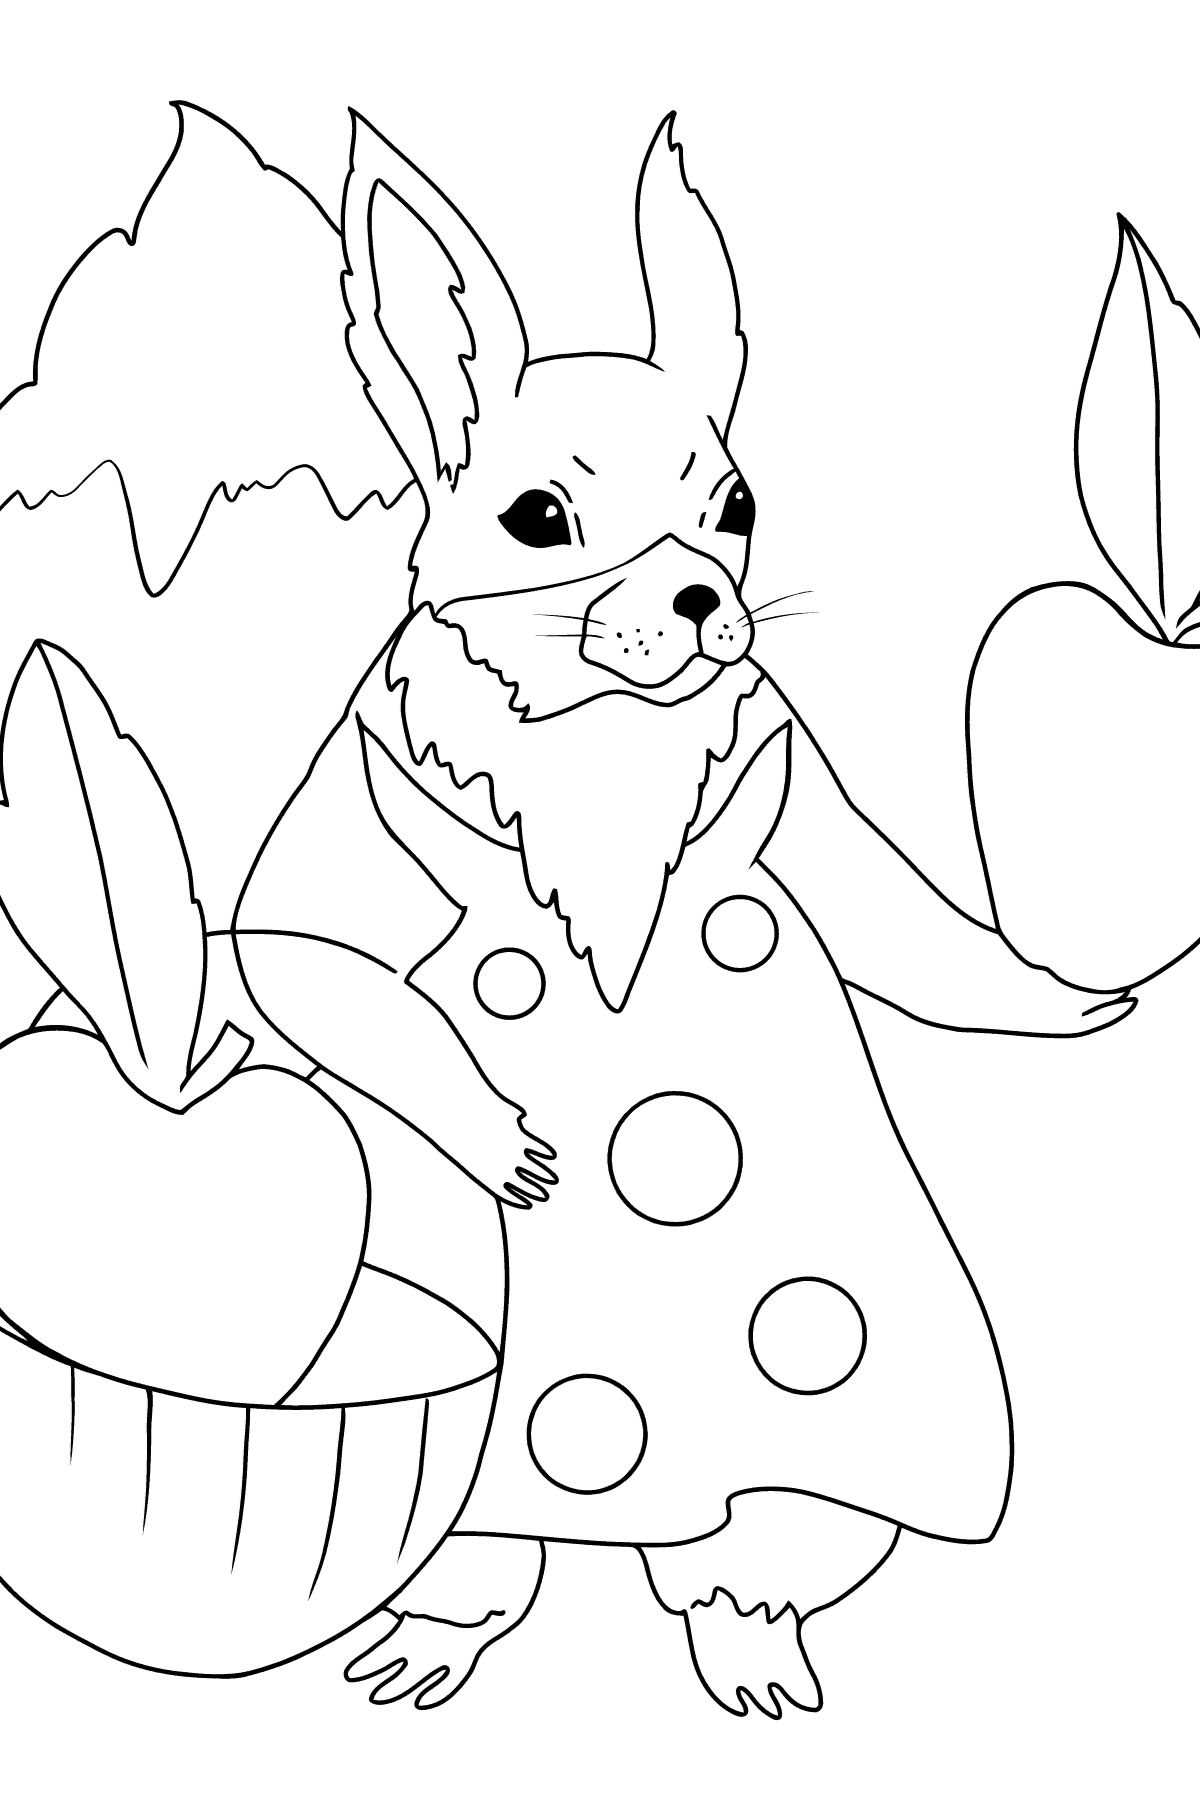 Squirrels coloring page for kids - Coloring Pages for Kids